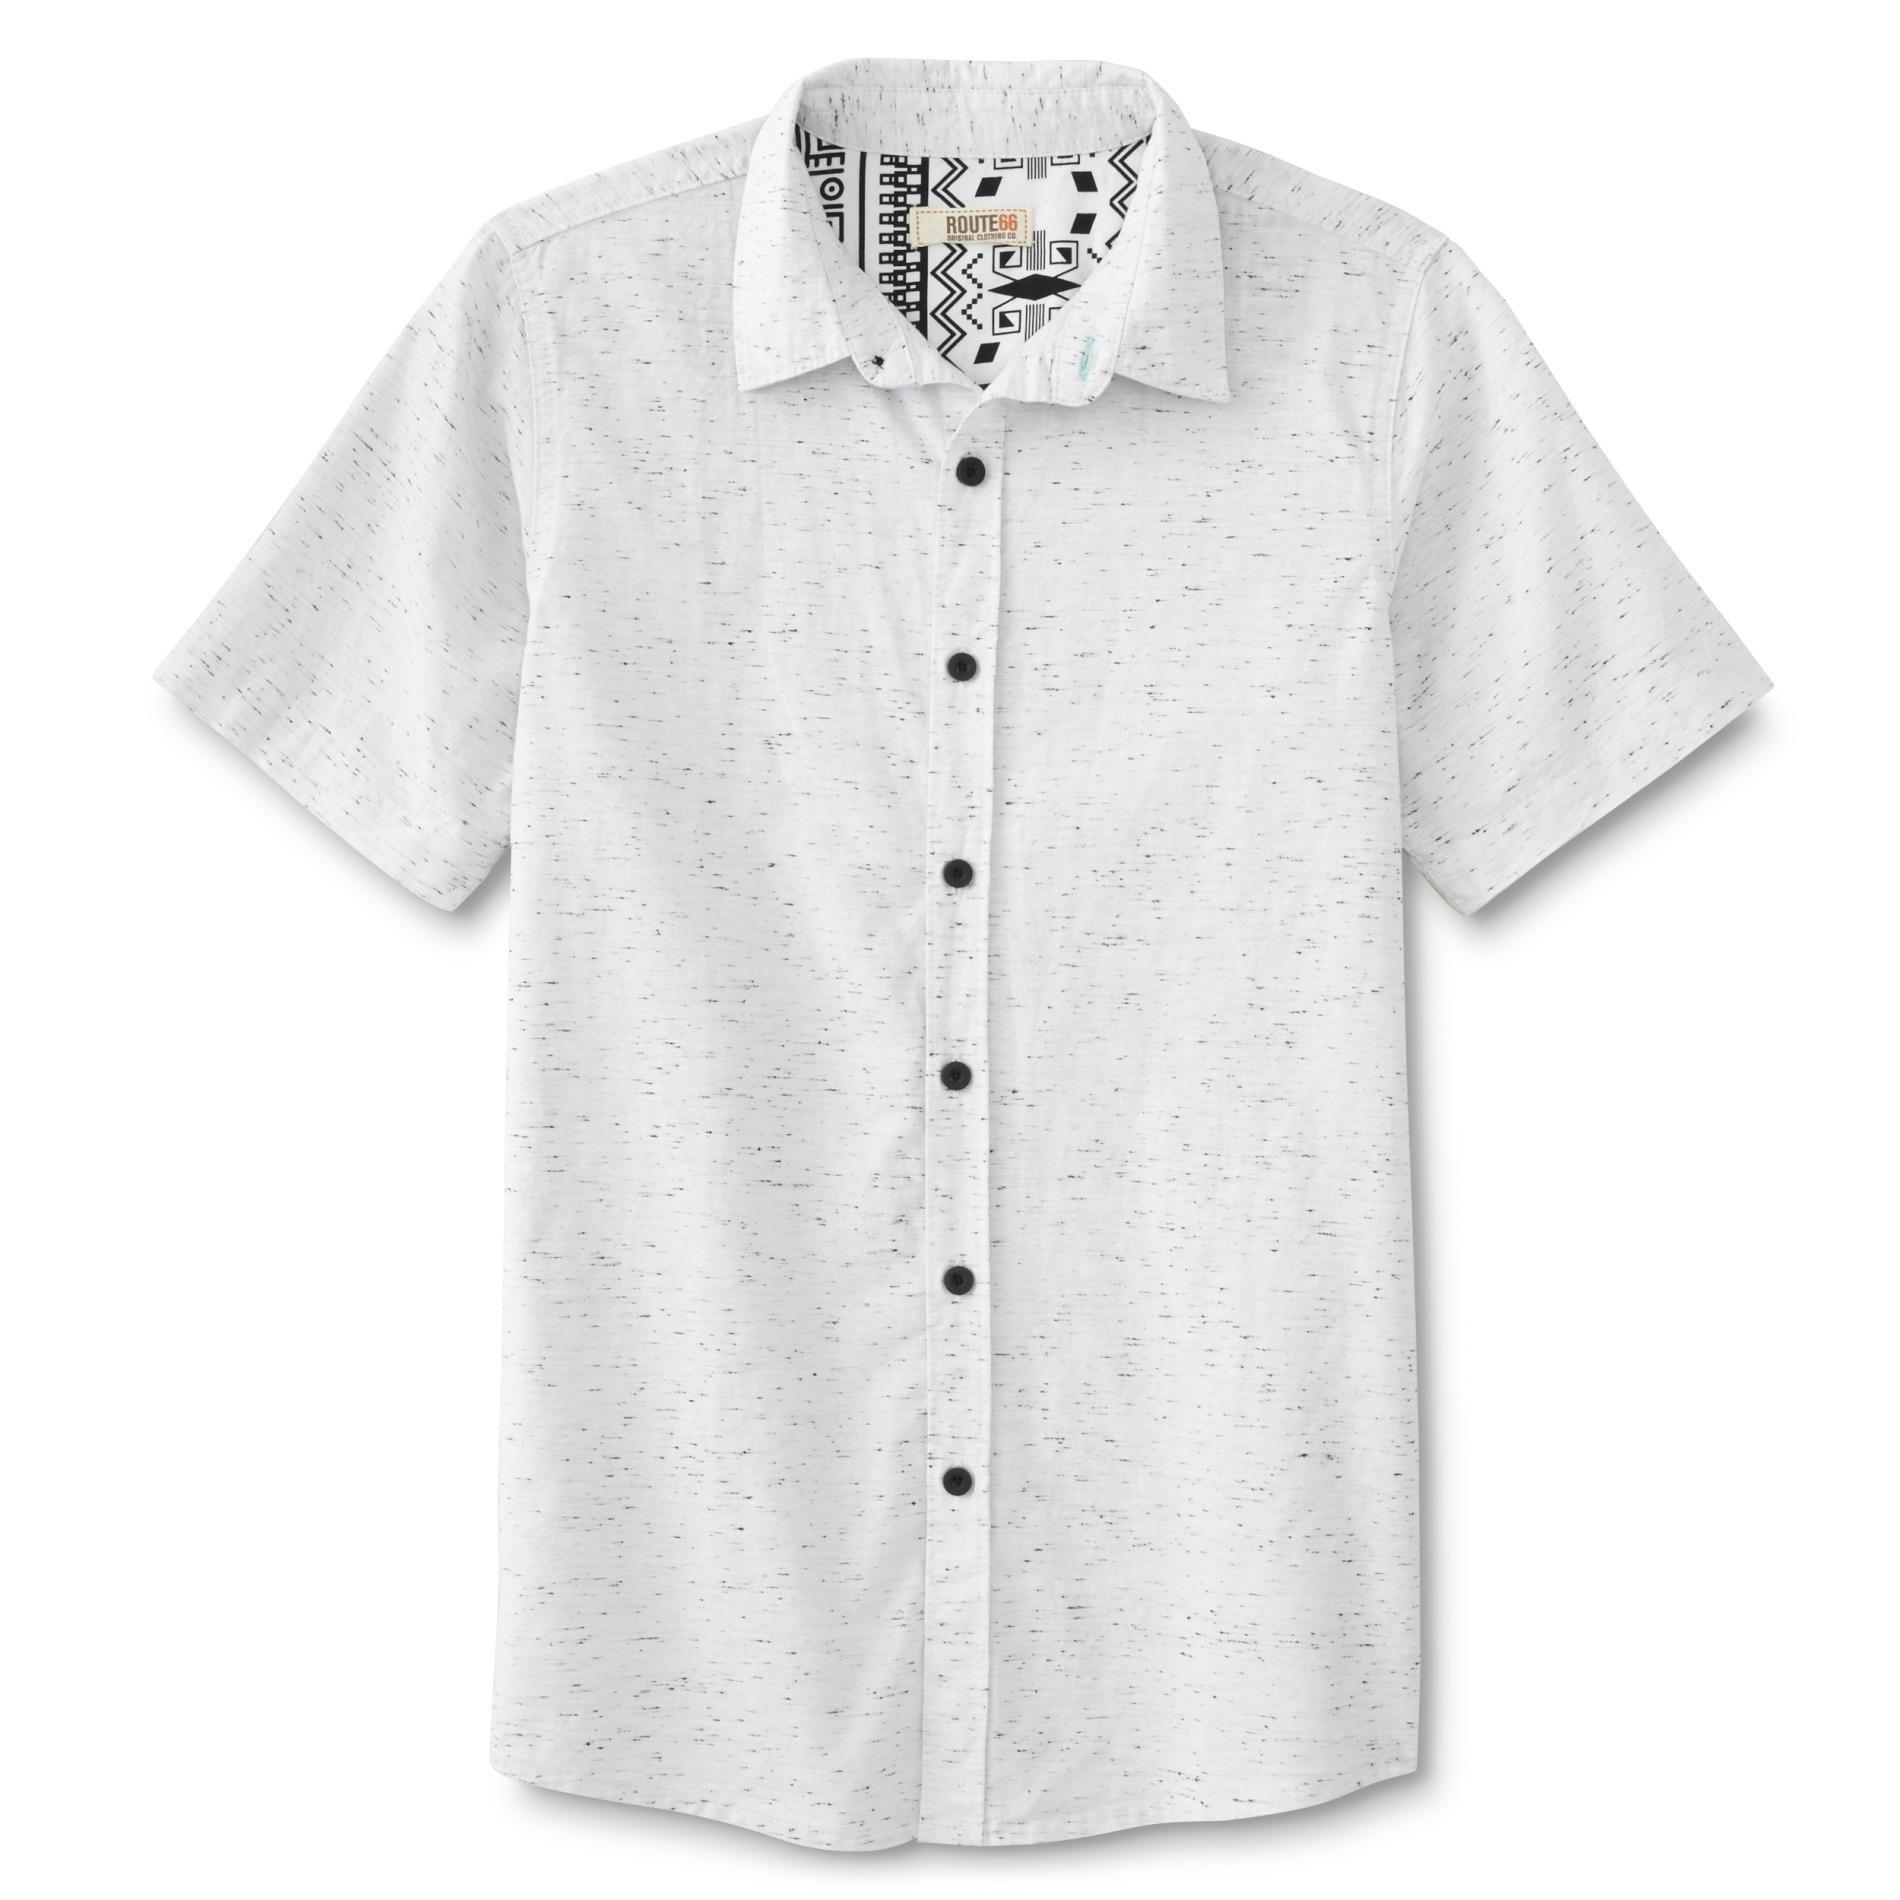 Boy's Button-Front Shirt - Freckled